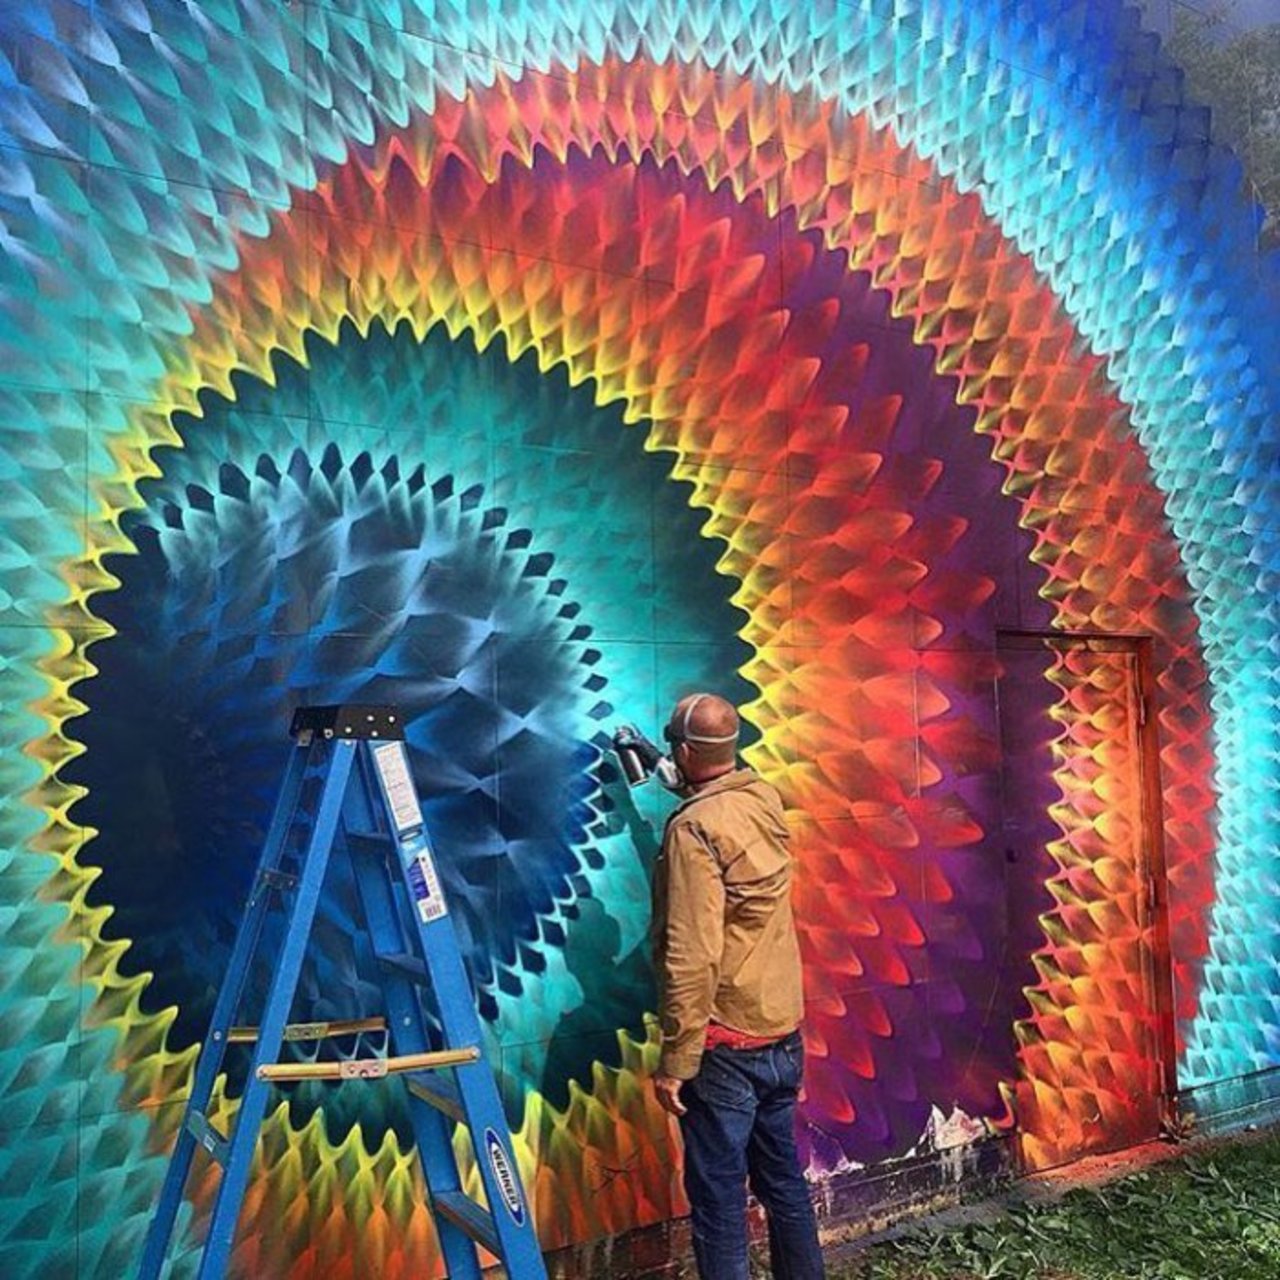 #StreetArt Rainbow – Creative Colours | Be ▲rtist - Be ▲rt https://beartistbeart.com/2016/06/23/streetart-rainbow-creative-colours/?utm_campaign=crowdfire&utm_content=crowdfire&utm_medium=social&utm_source=twitter https://t.co/D9WeOCht75